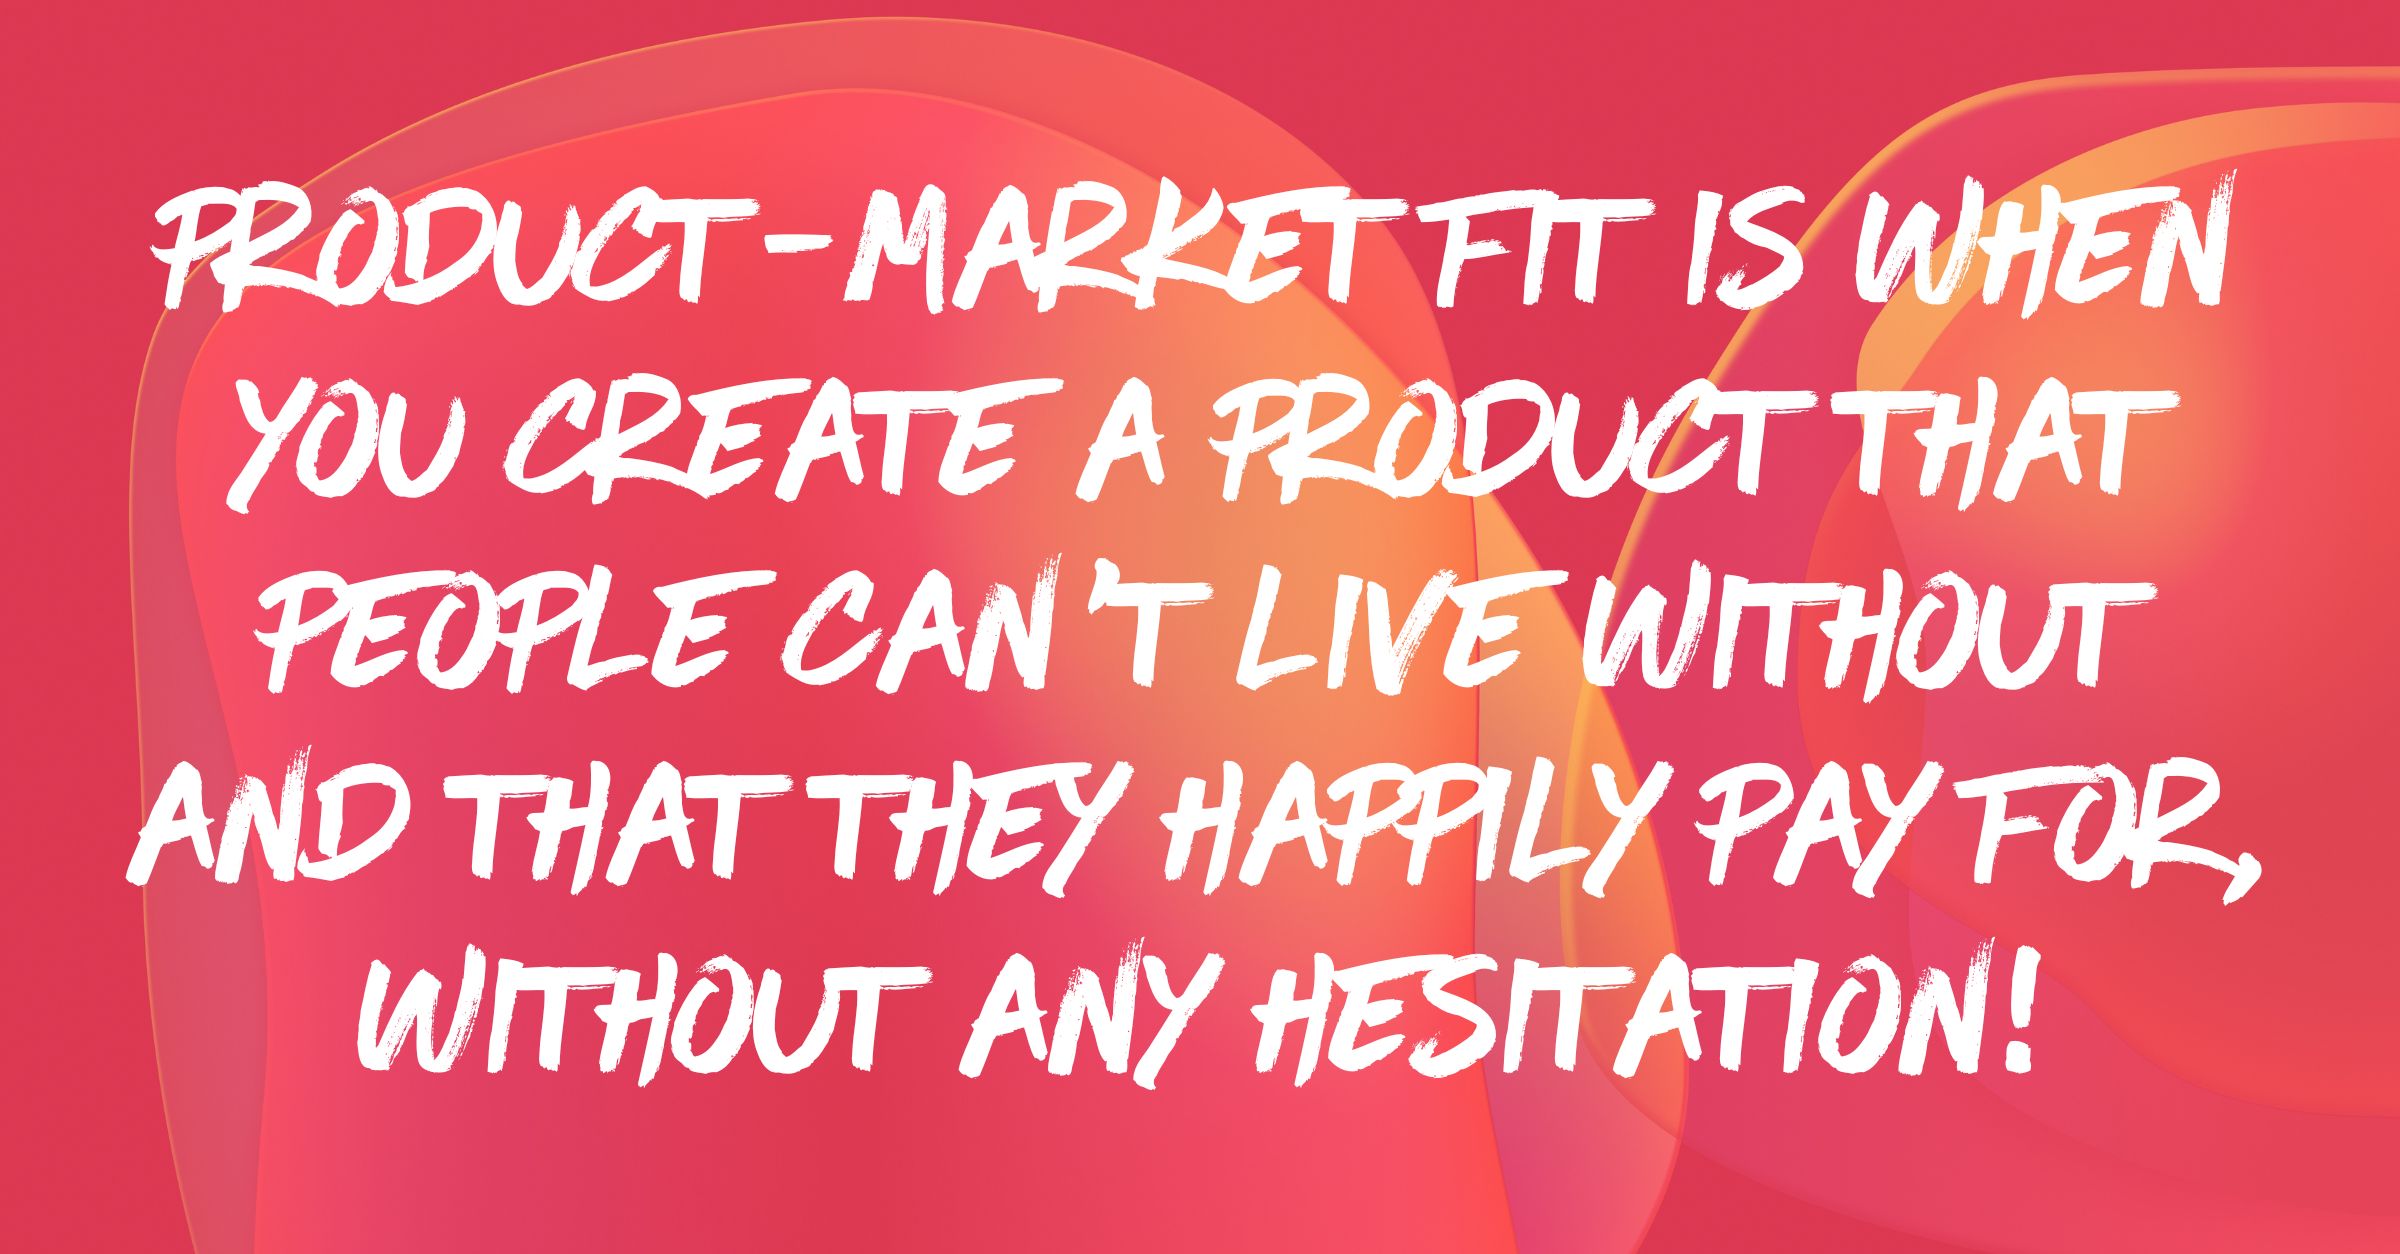 Product-Market Fit is when you create a product that people can’t live without and that they happily pay for, without any hesitation!